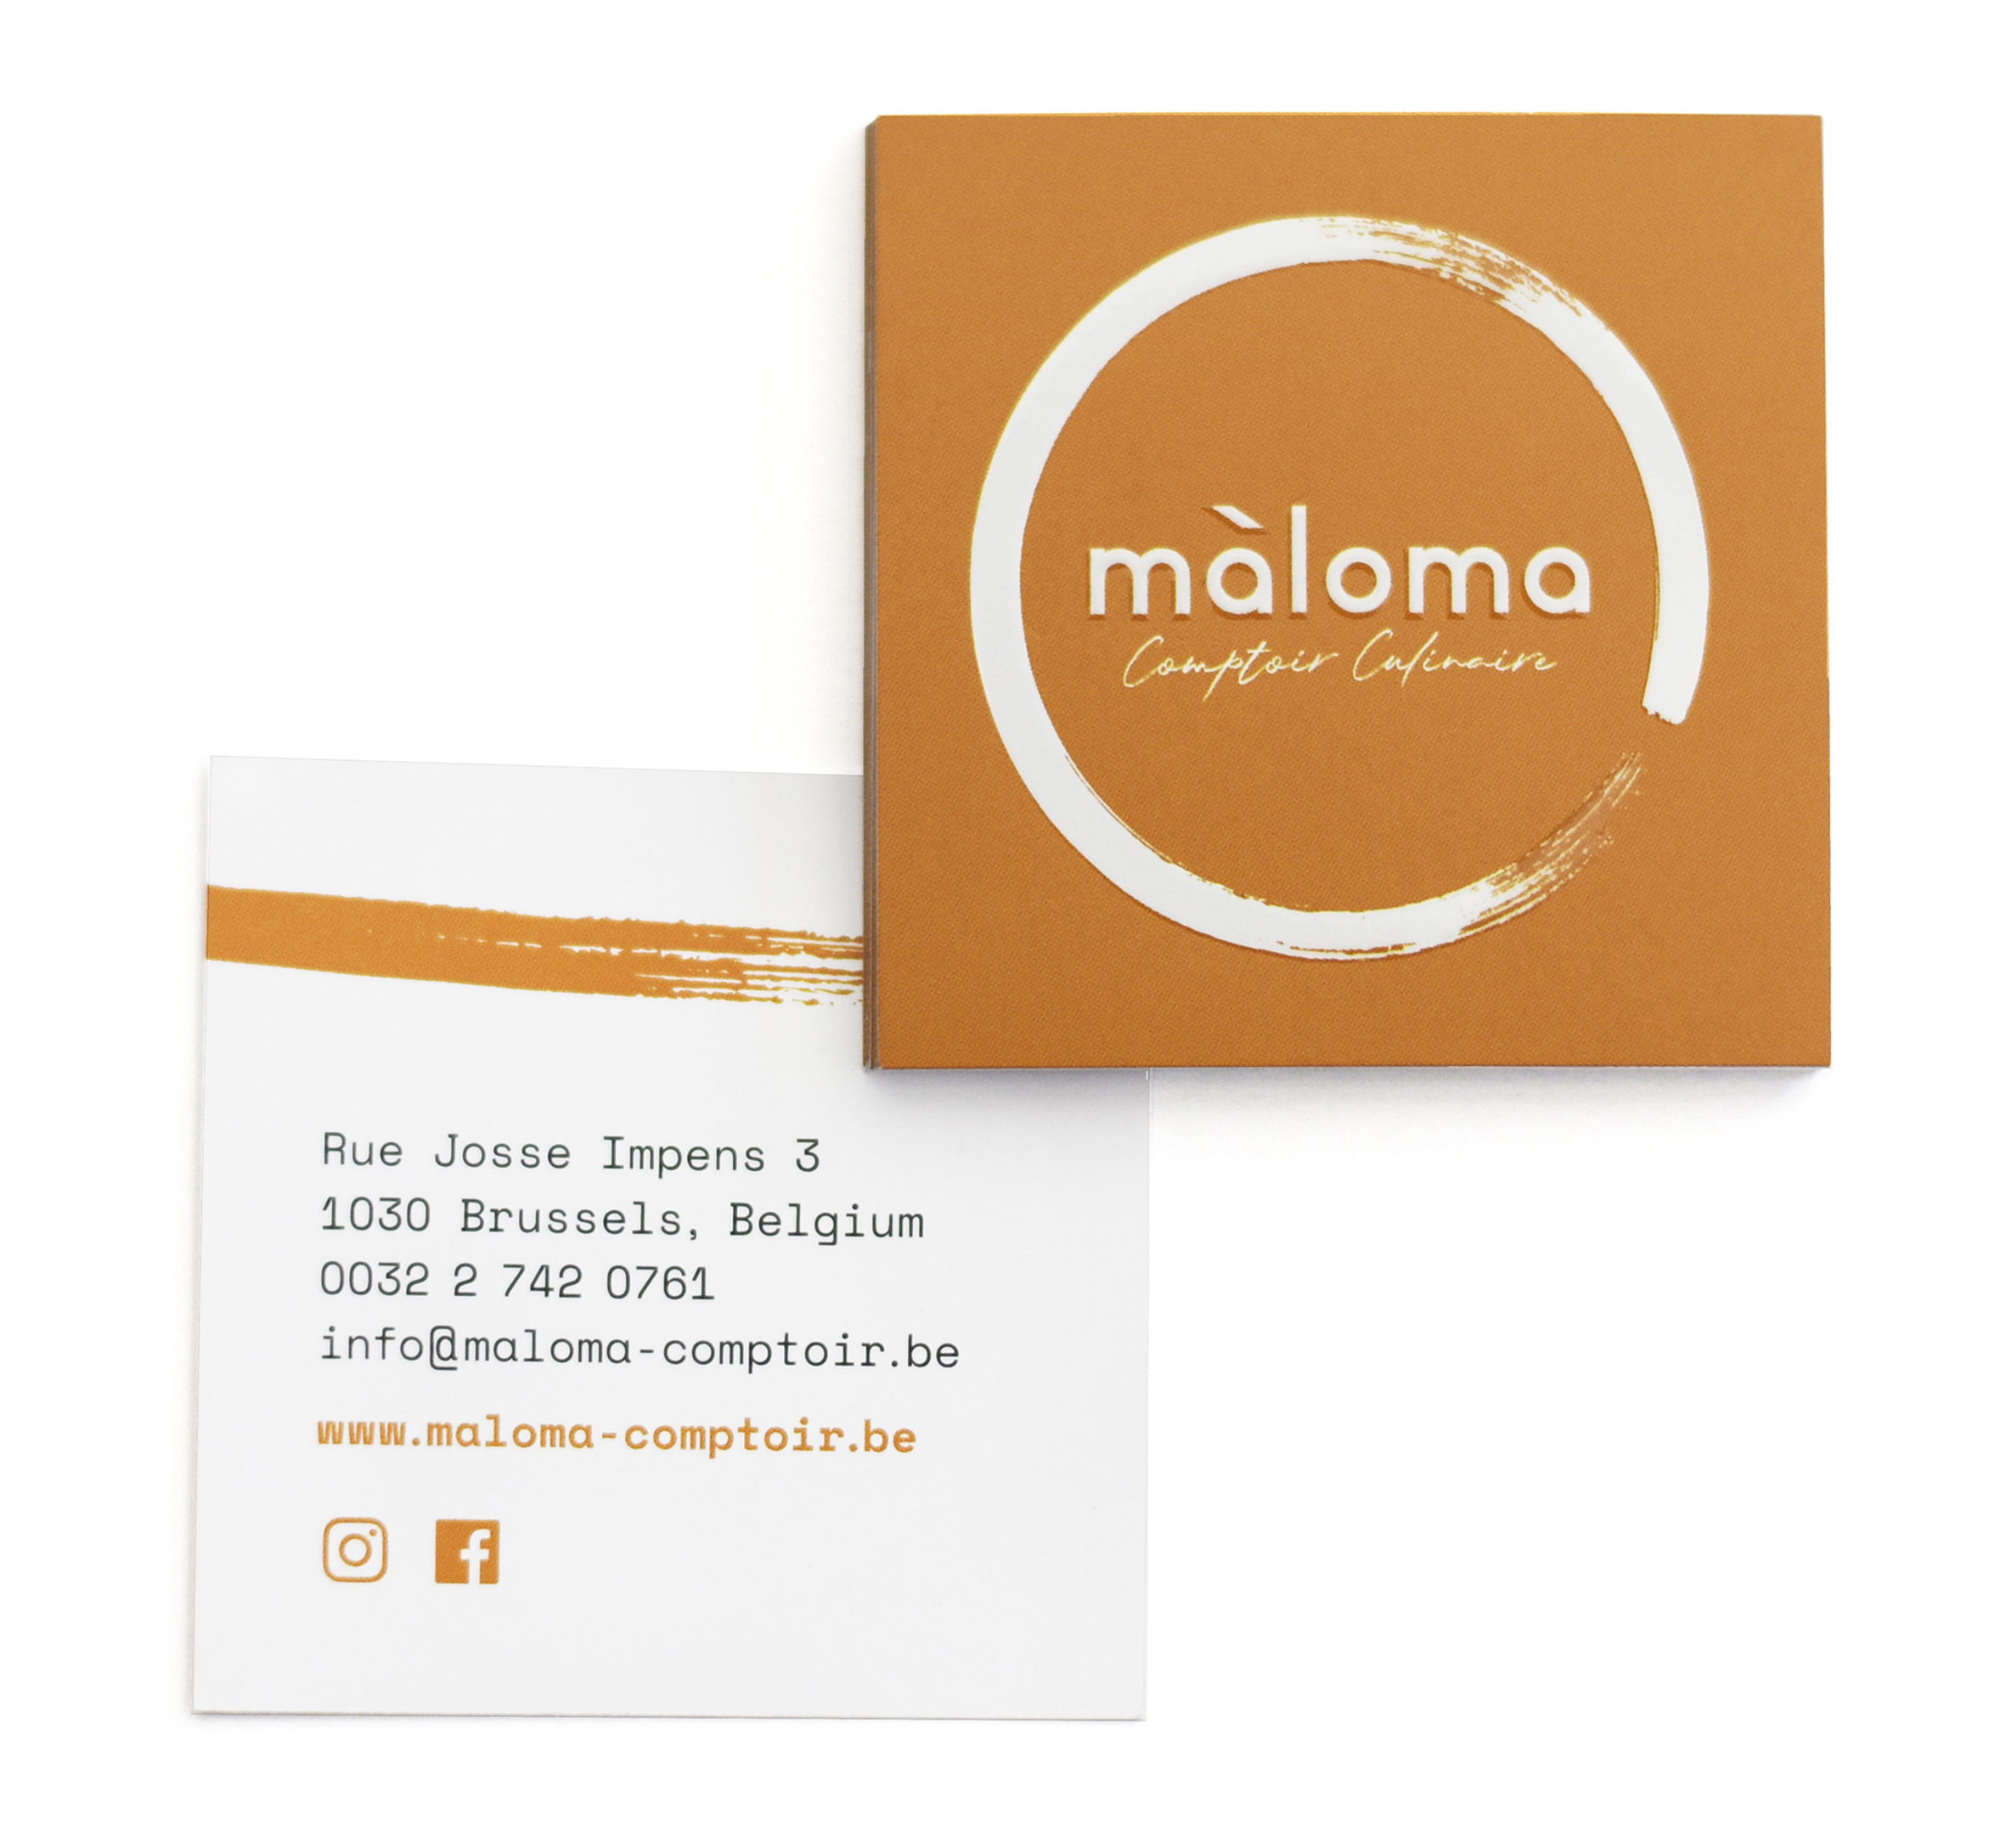 maloma comptoire culinaire restaurant business card